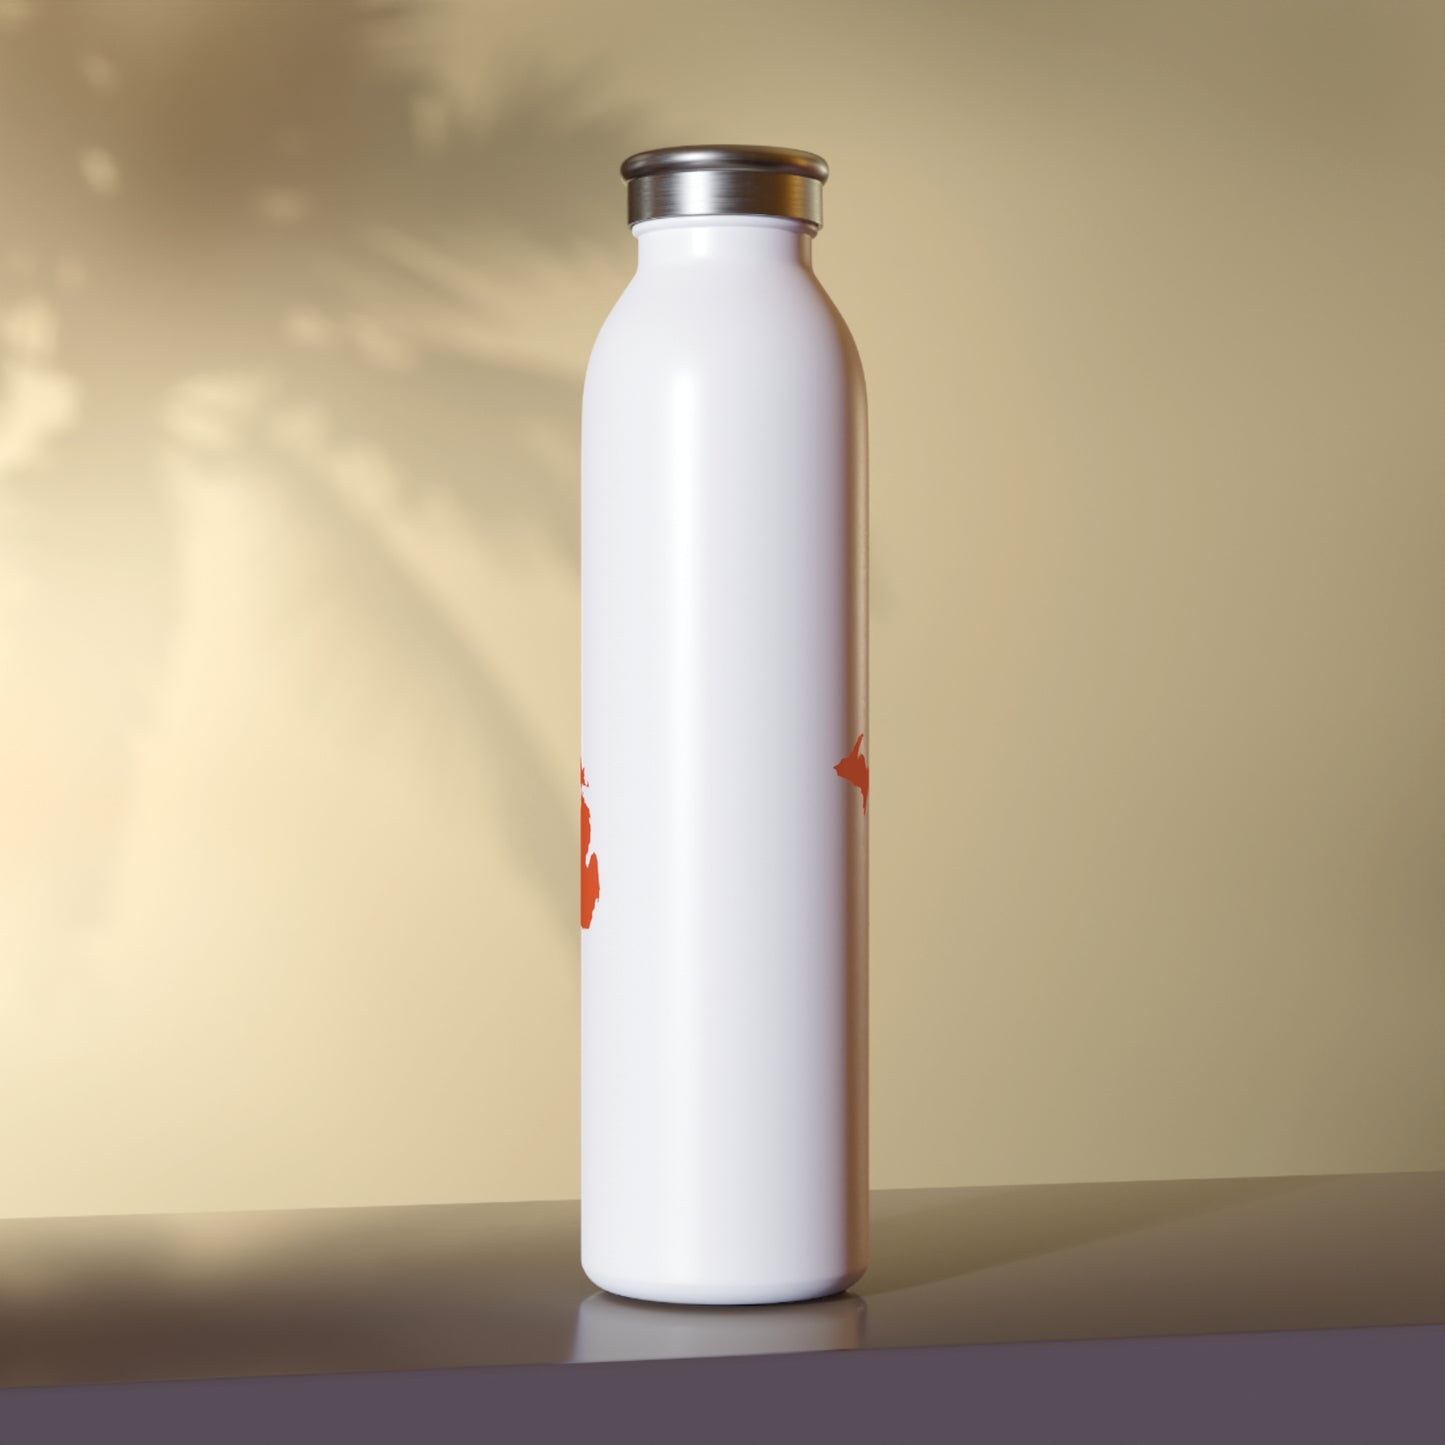 Michigan Water Bottle (w/ Maple Leaf Color) | 20oz Double-Walled